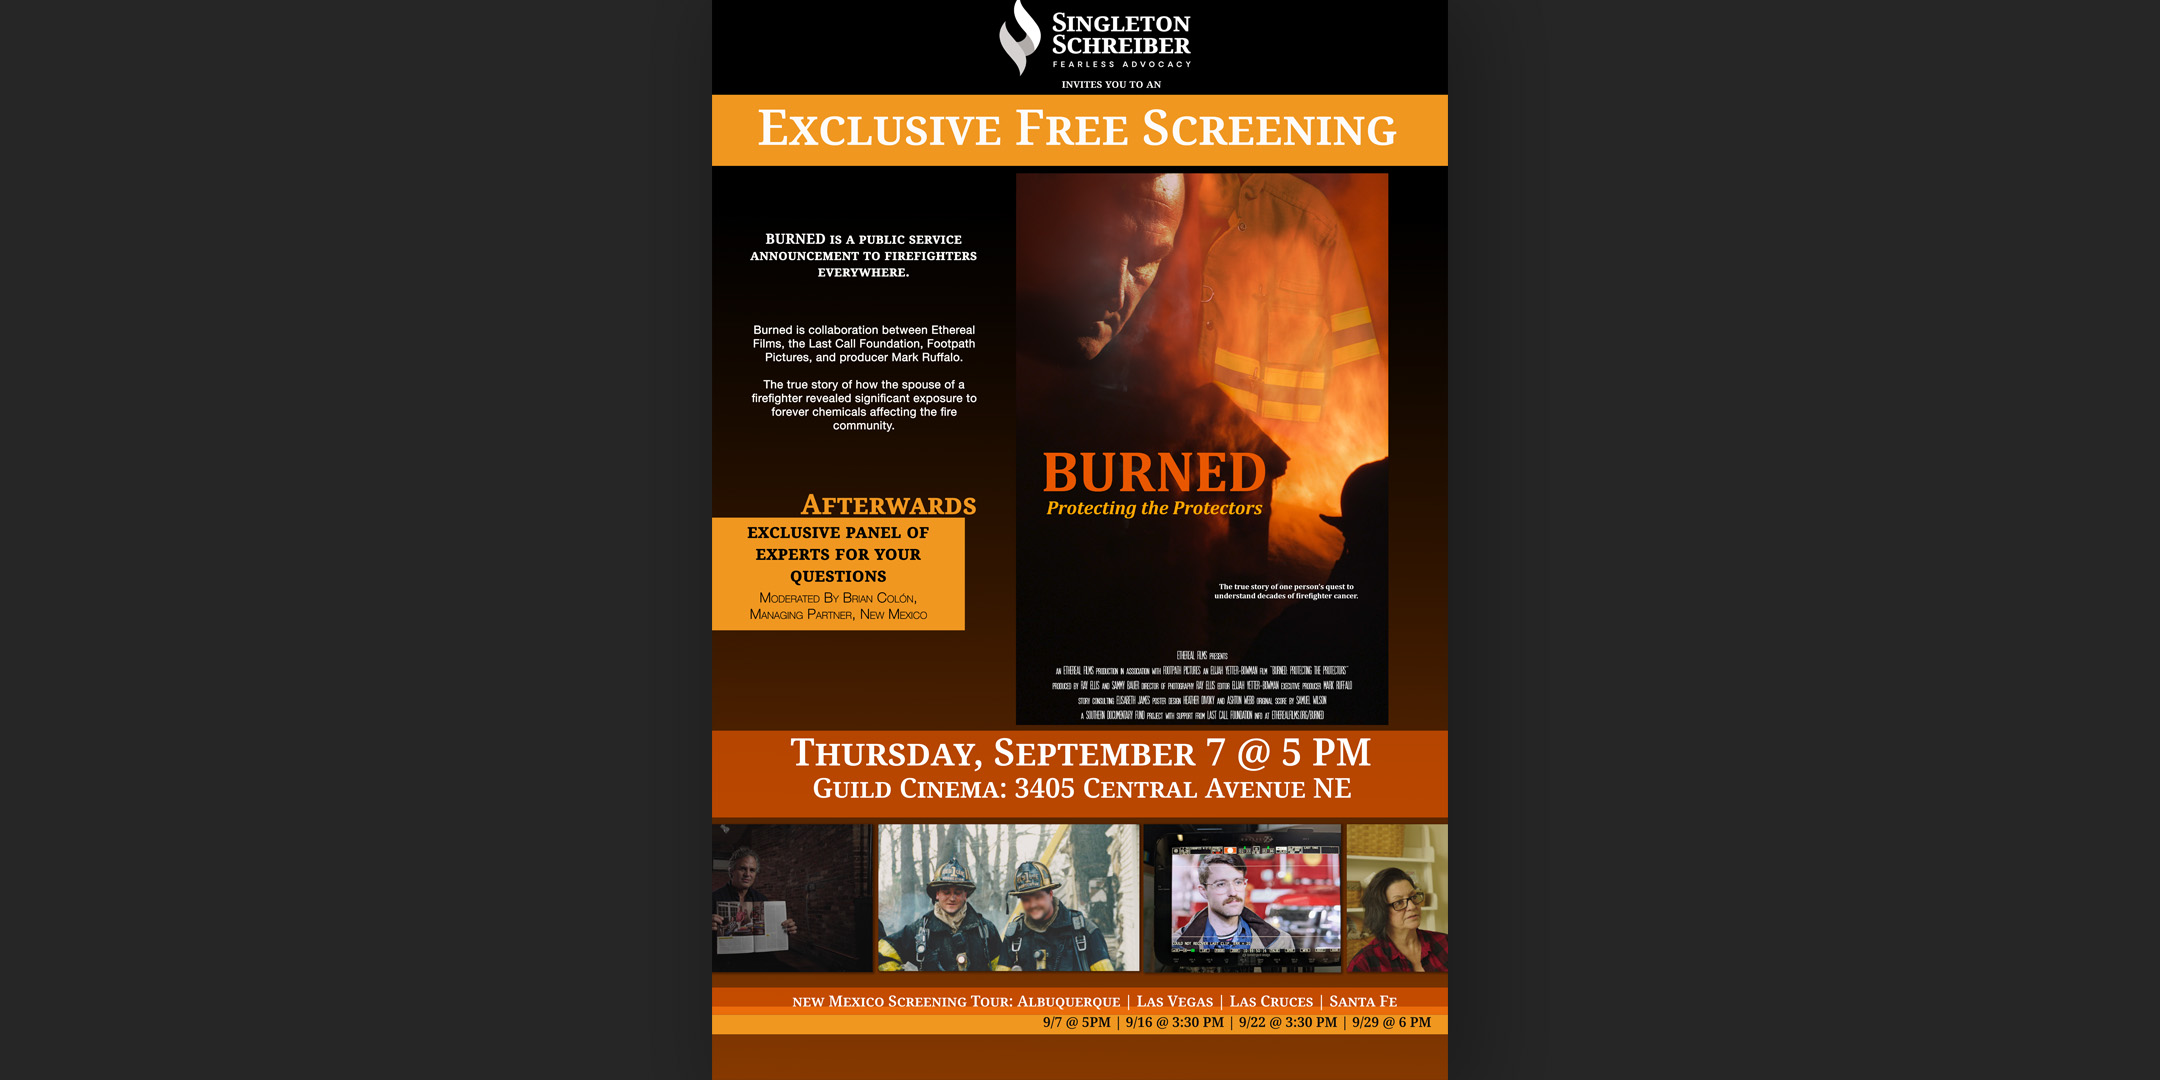 Burned: Protecting the Protectors (ABQ: Free Screening)